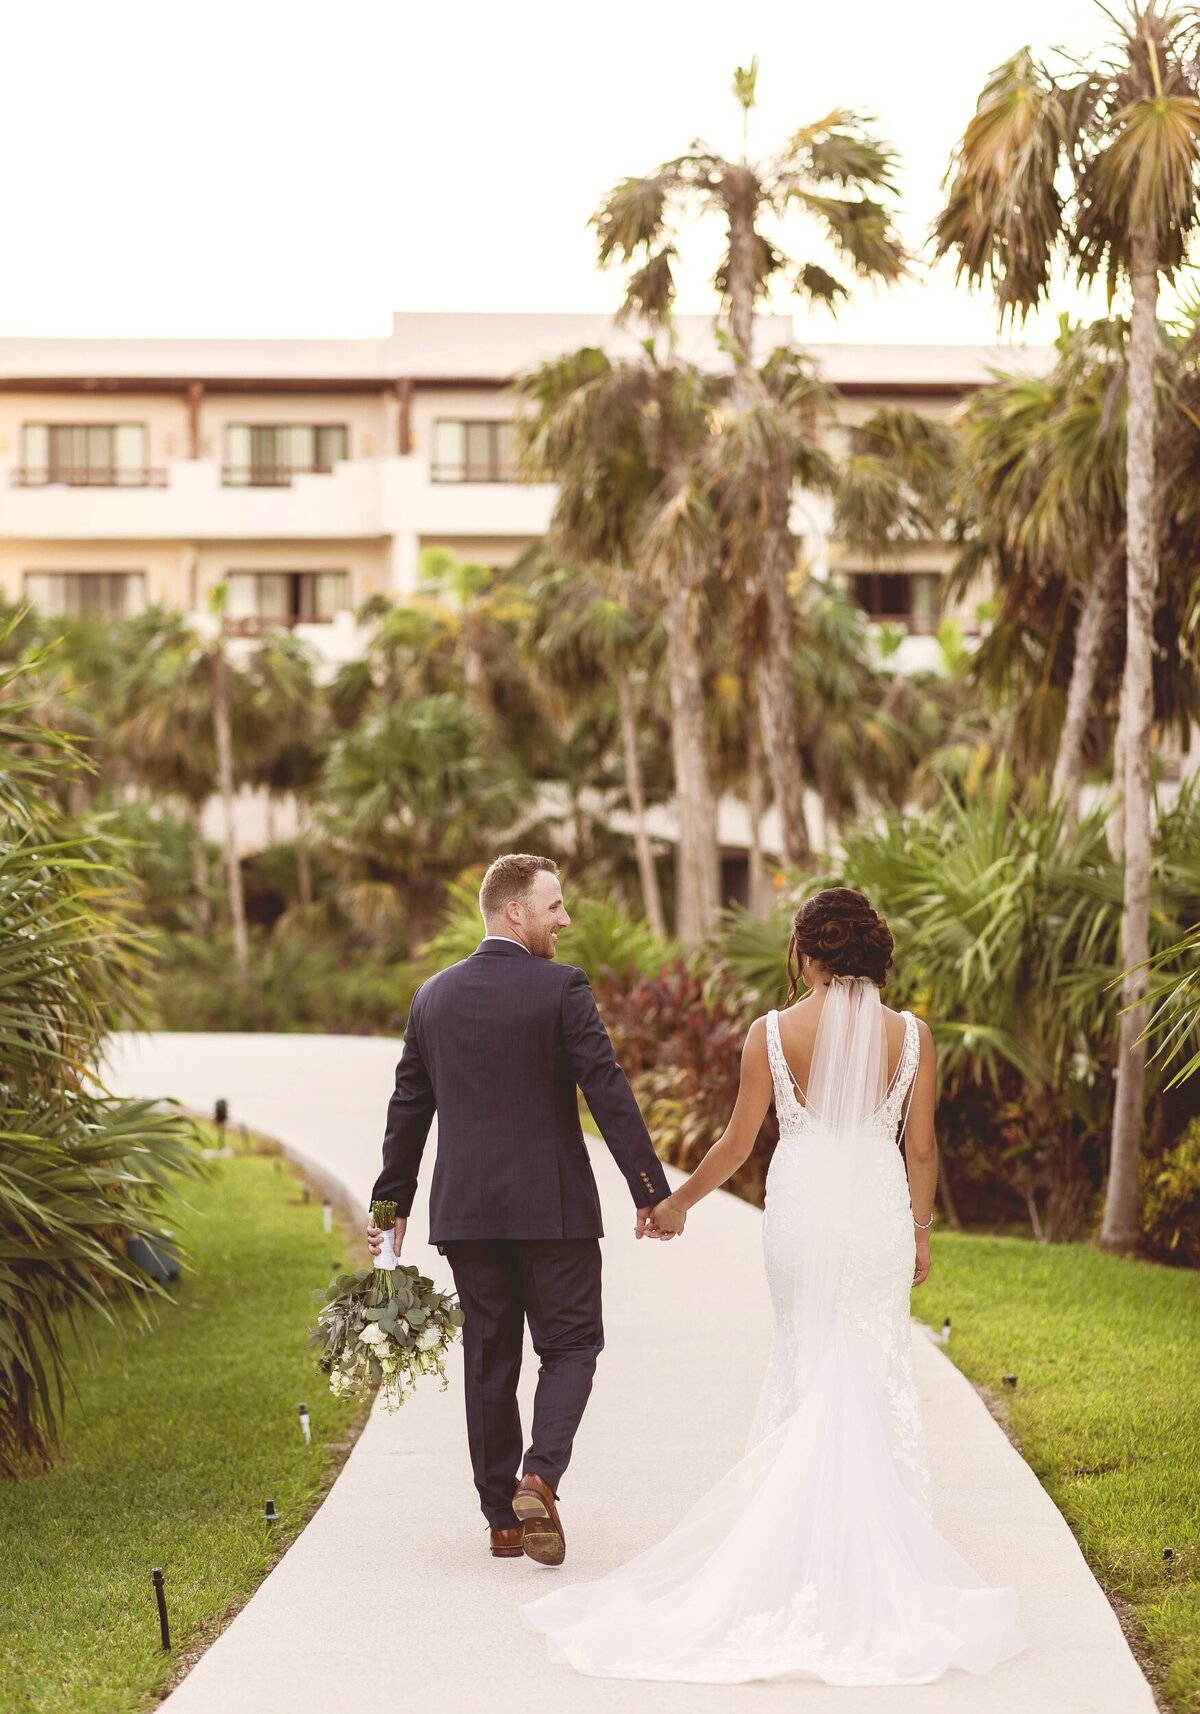 Photo from behind as bride and groom walk down path